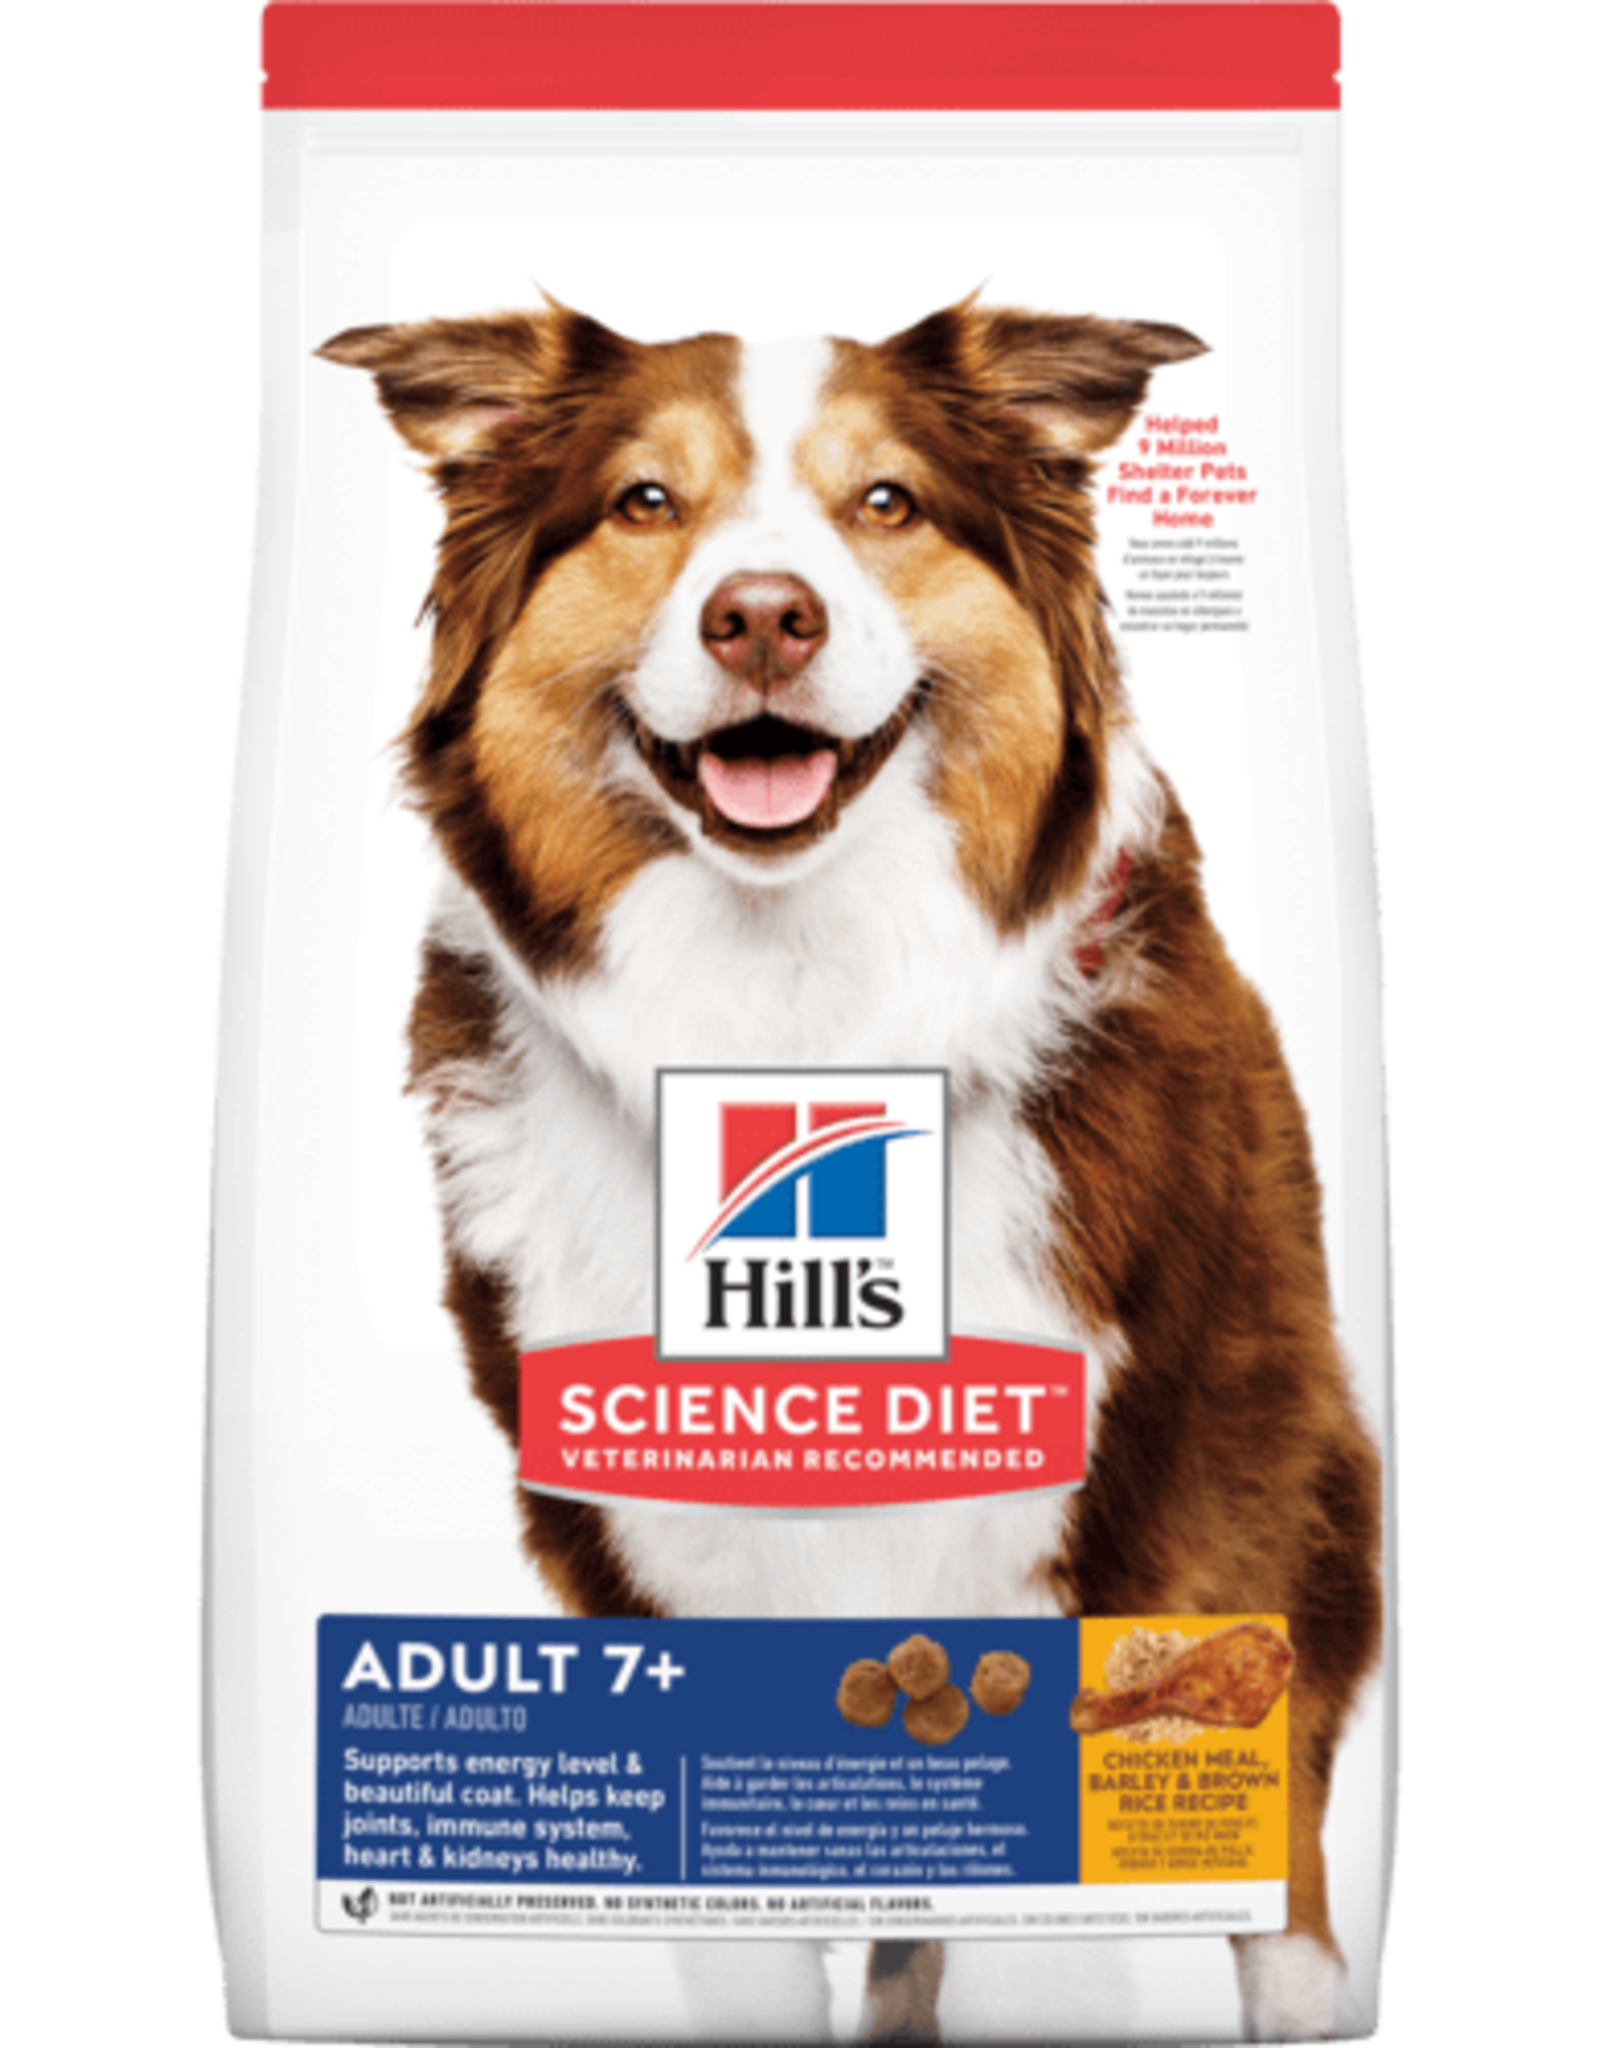 SCIENCE DIET HILL'S SCIENCE DIET CANINE MATURE ADULT 7+ 5LBS